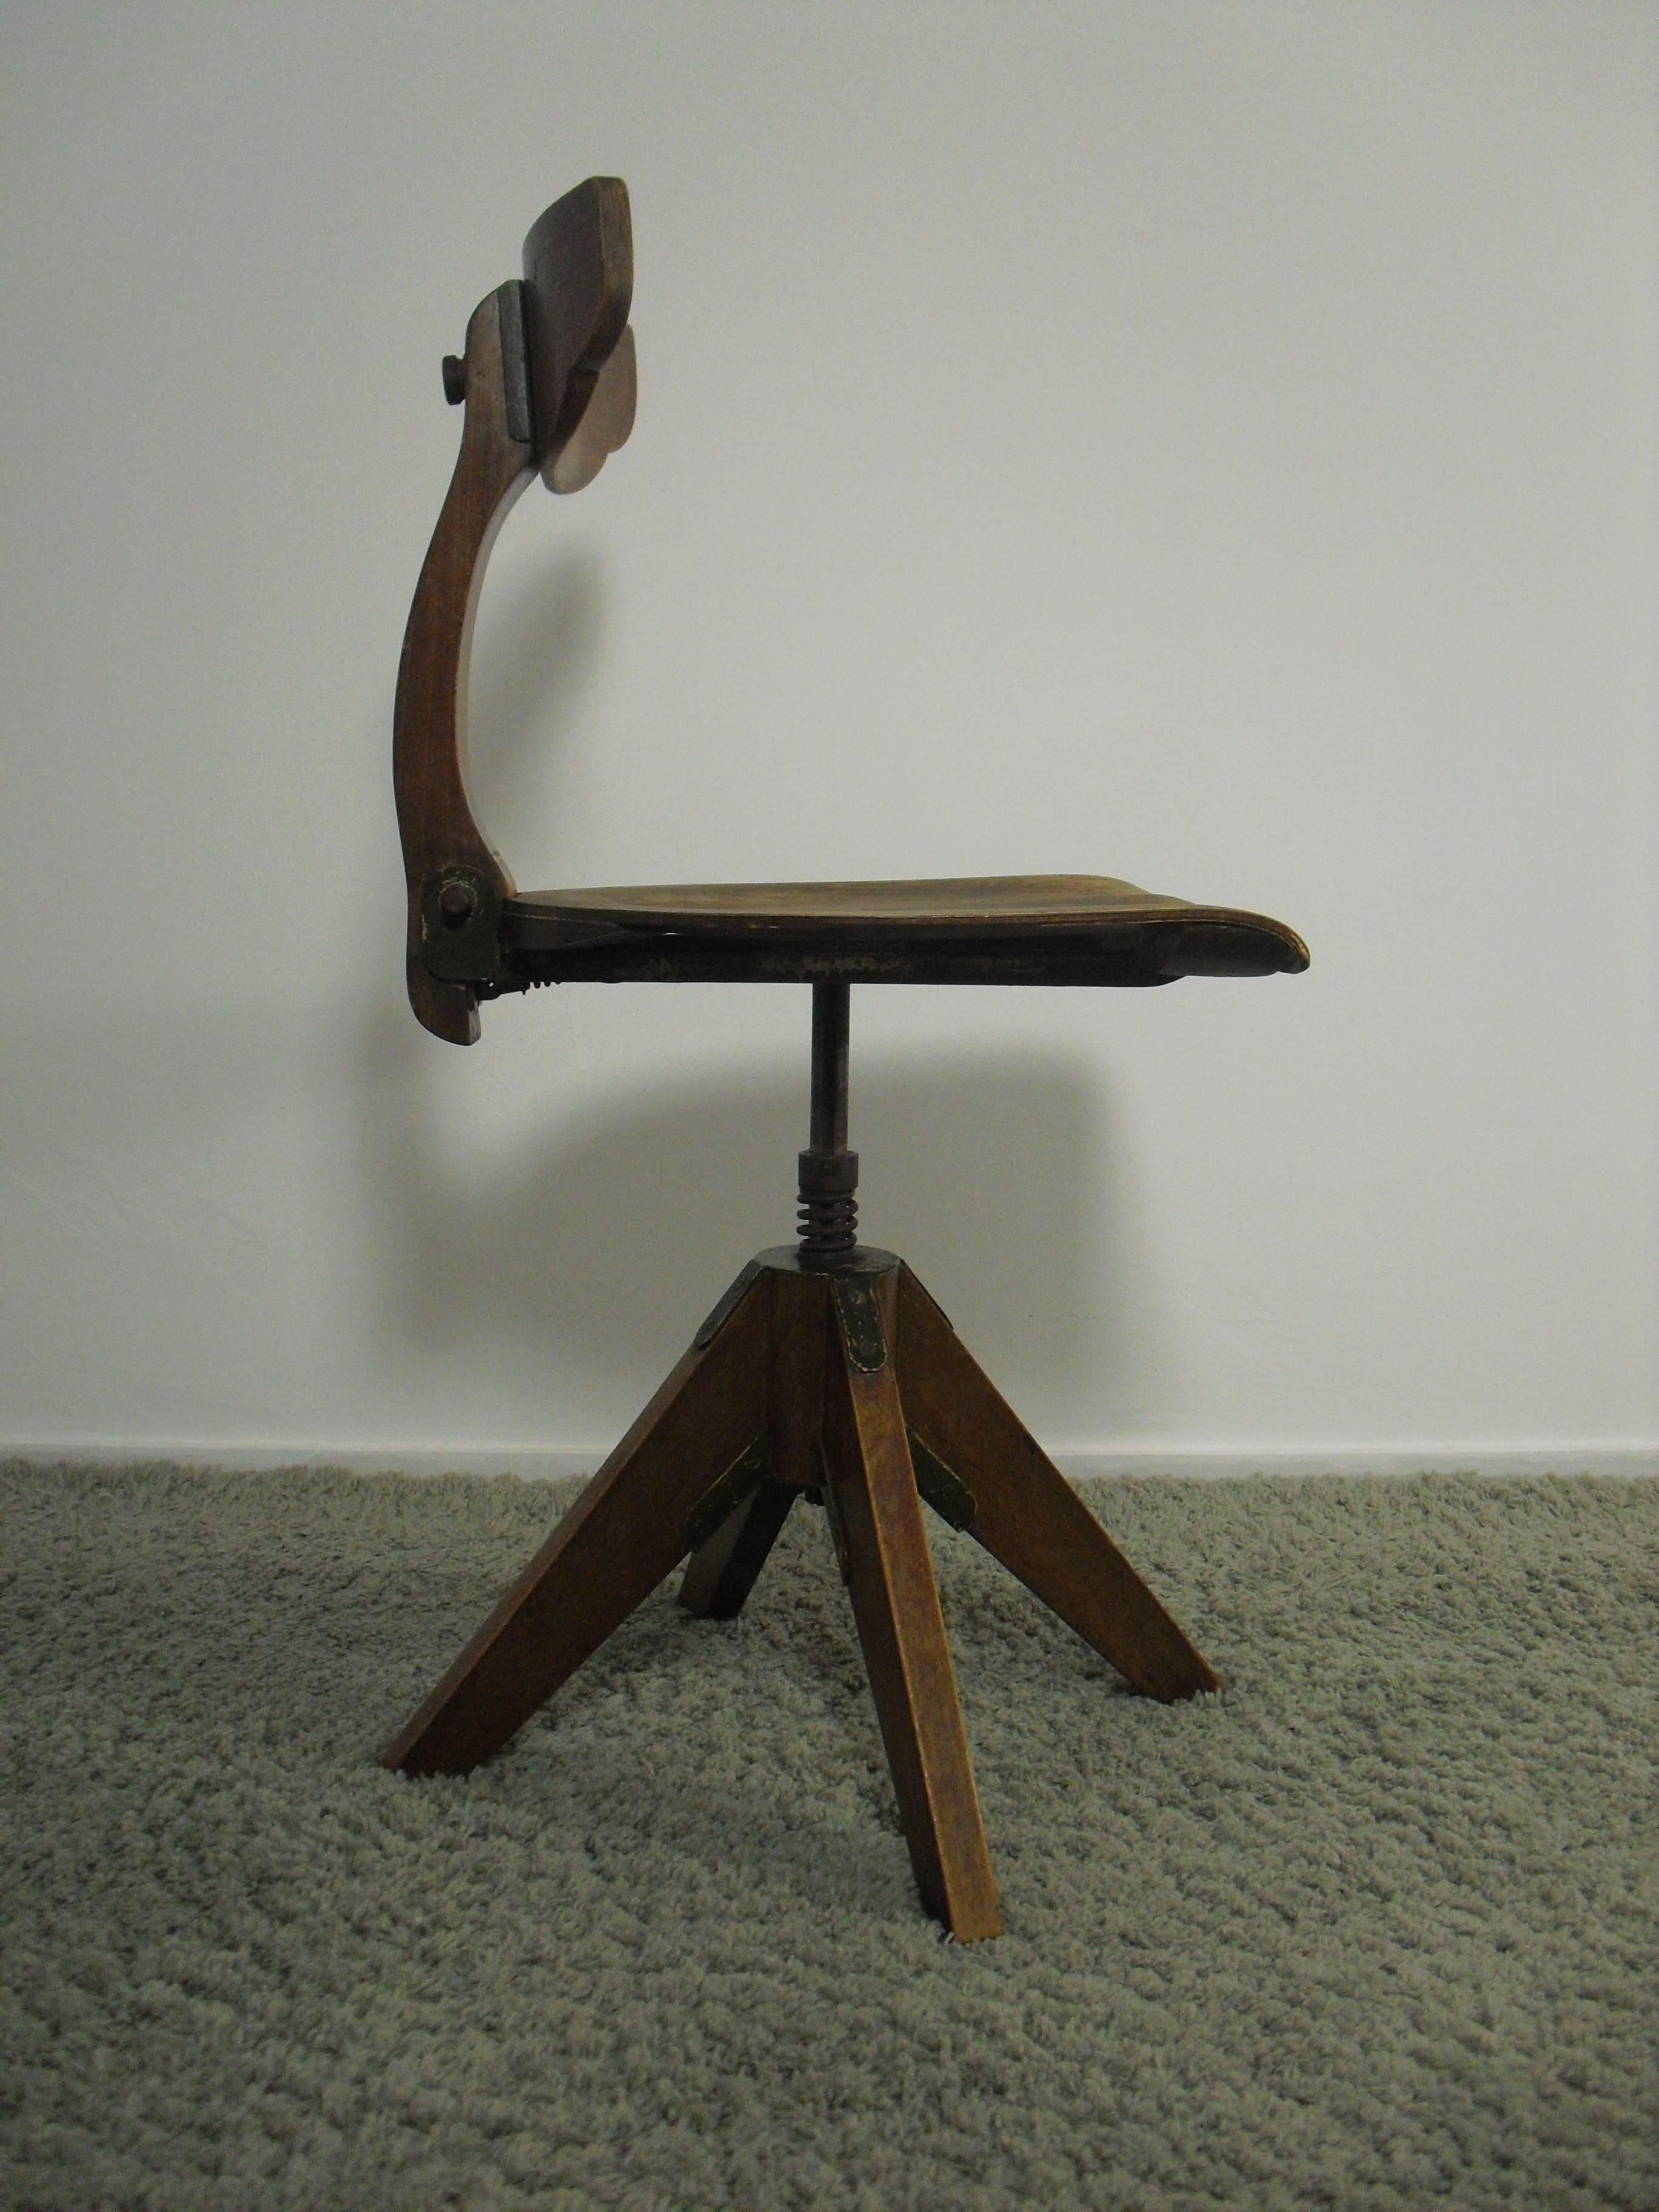 Early 20th century German Bauhaus architectural desk chair by M&R Zocher Dresden.
Chair is made of oak with plywood seat and has great looking patina!
Seat and backrest are adjustable.
Marked under the seat.

Dimensions: W 48 cm x D 49 cm /